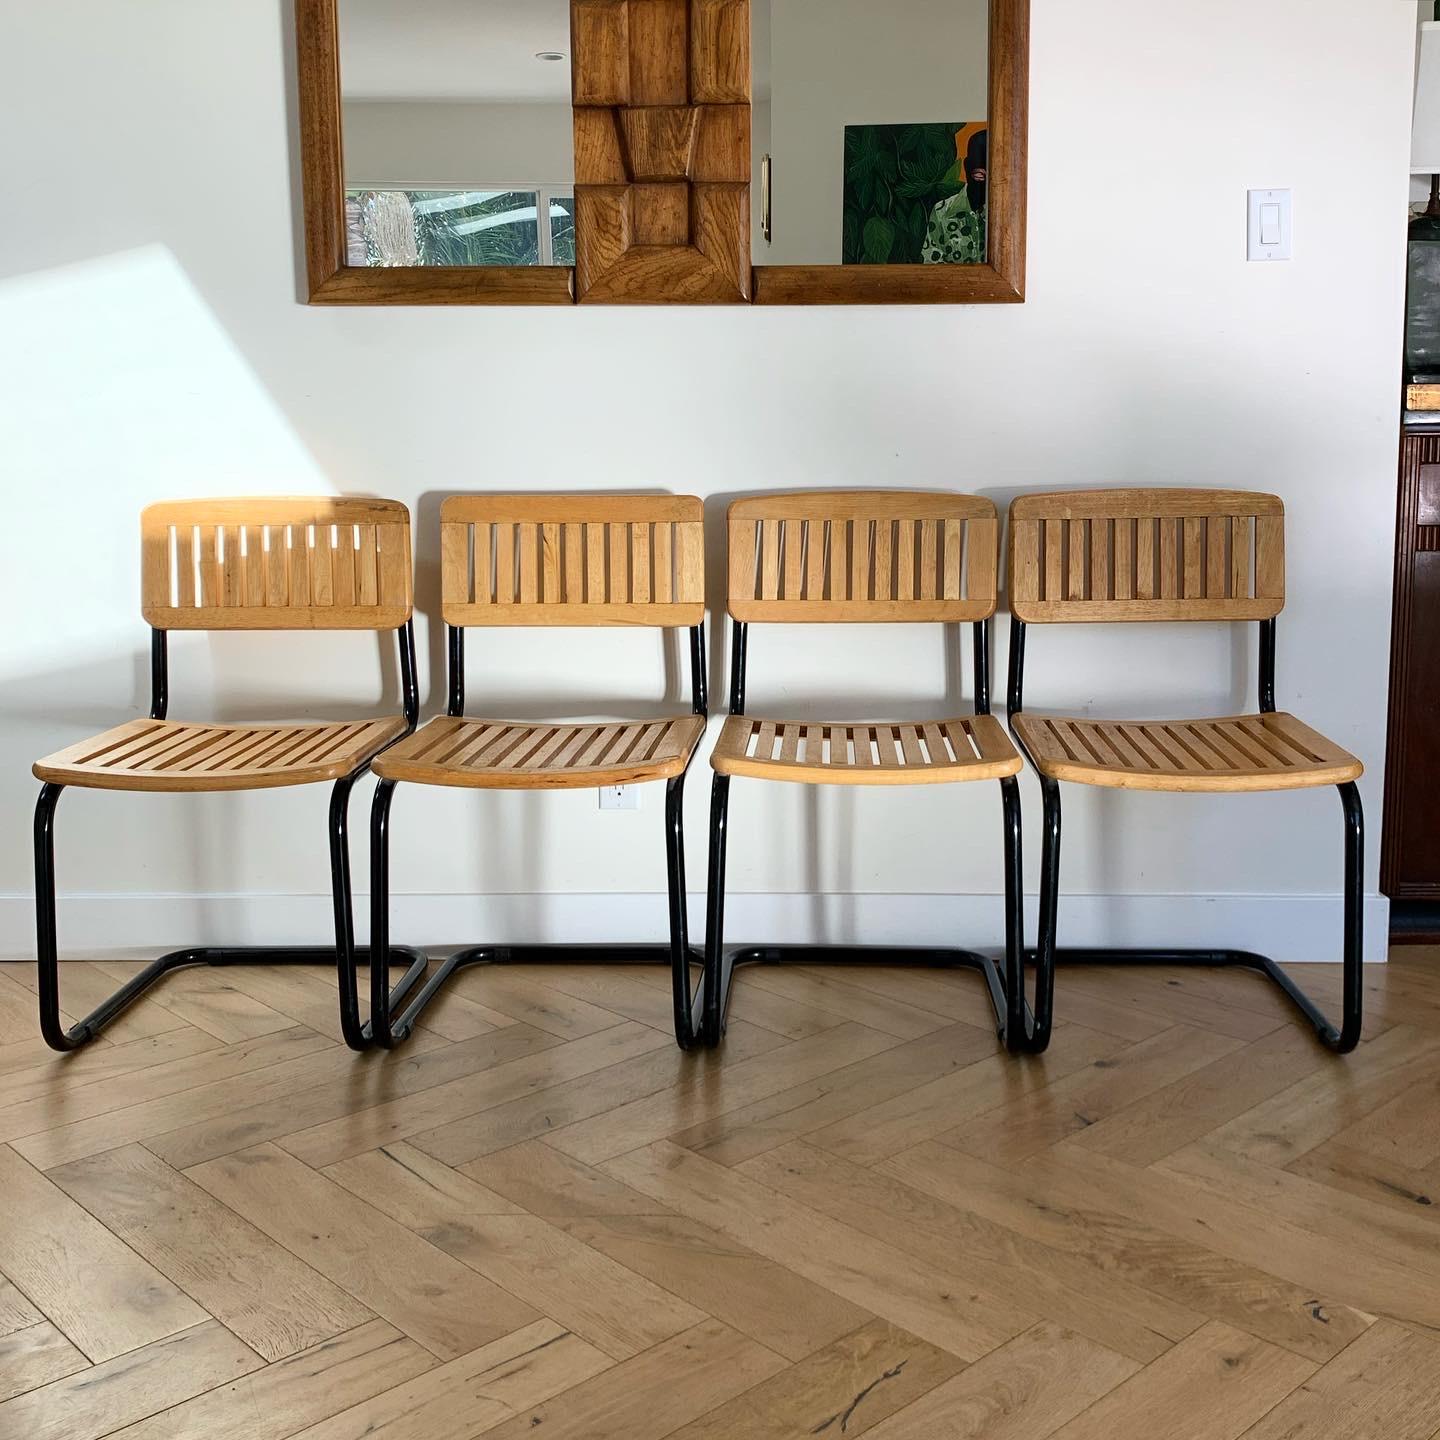 Set of 4 Mid-Century Modern unique and chic slated wood and black lacquer Cesca style chairs. Sturdy and well-made but quite light-weight. Minor moments of wear consistent with age (as shown in photos) but overall fabulous condition.

Measures: